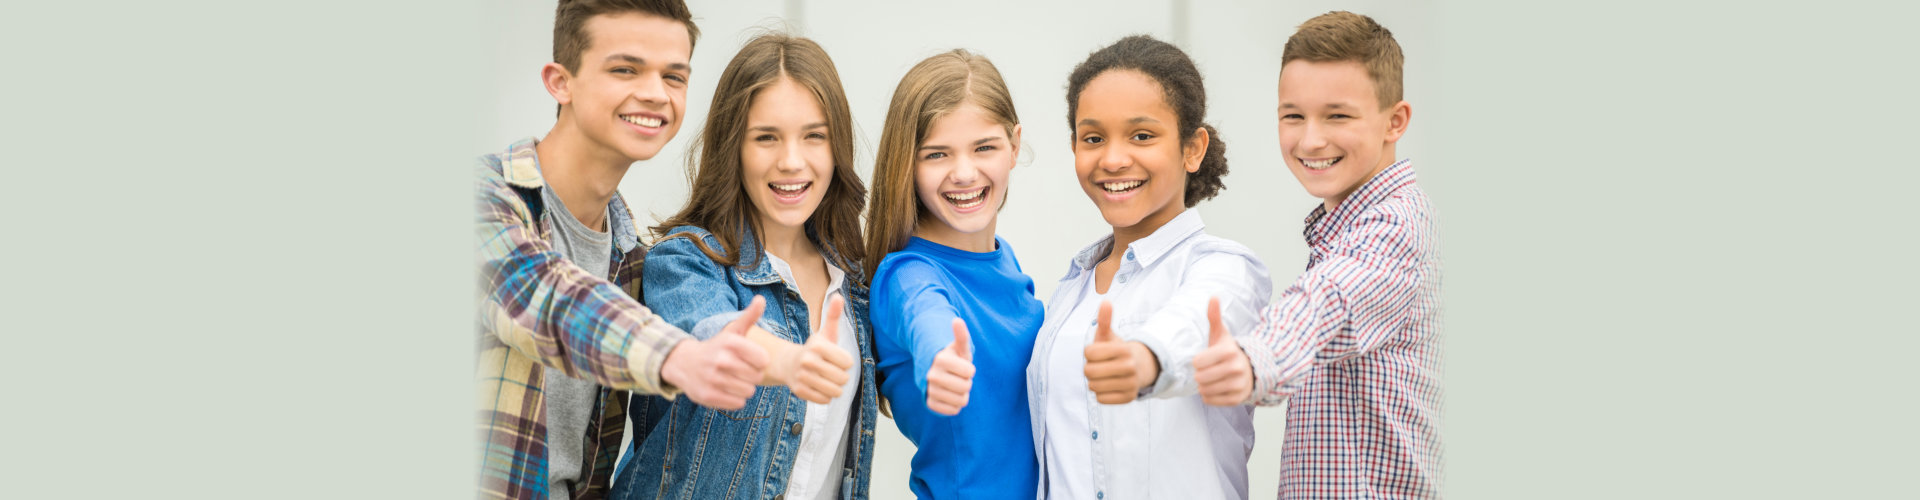 Group of smiling cheerful teenagers having fun after lessons and showing thumbs up